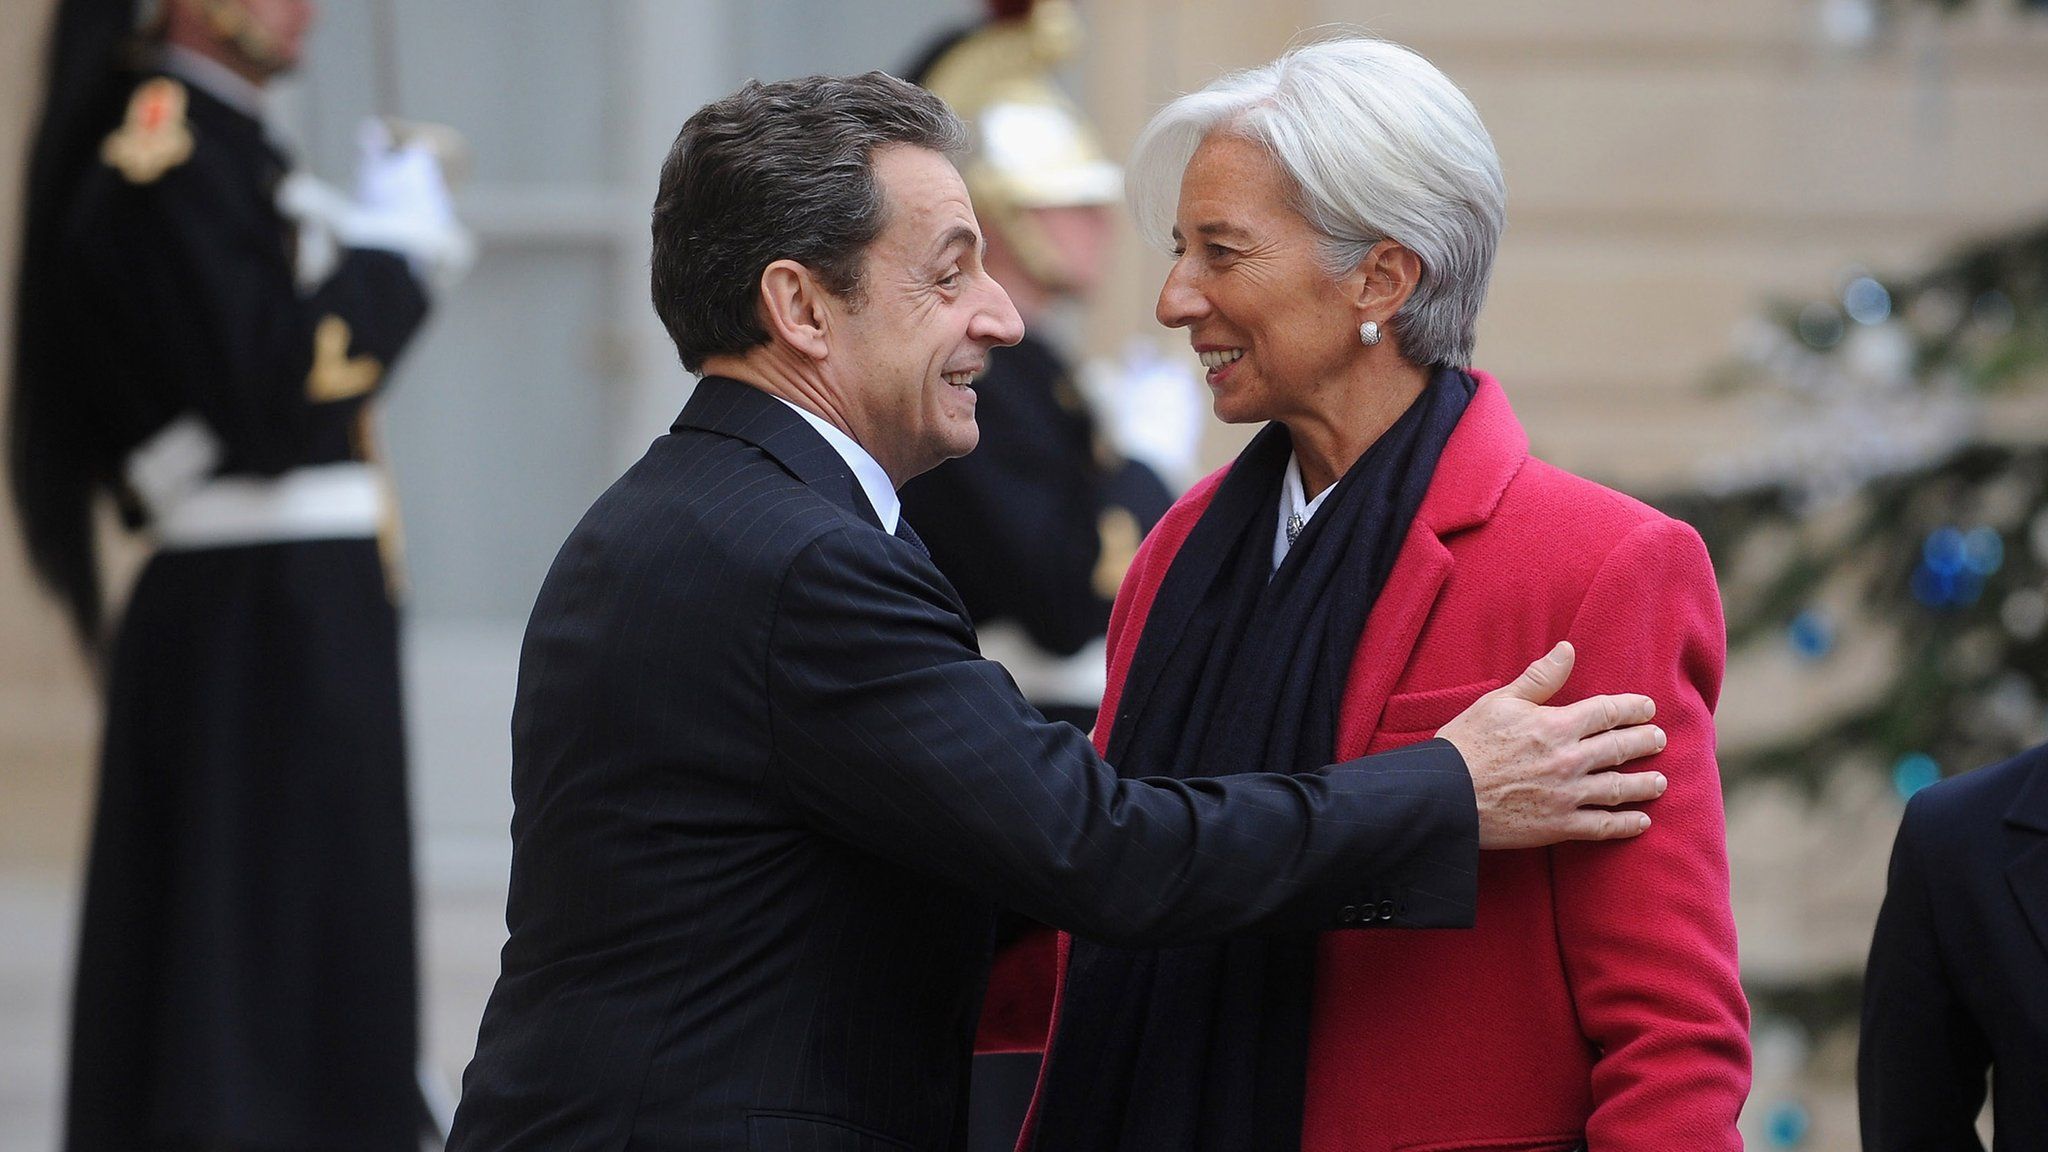 French President Nicolas Sarkozy (L) welcomes IMF chief Christine Lagarde at Elysee Palace on January 11, 2012 in Paris, France.